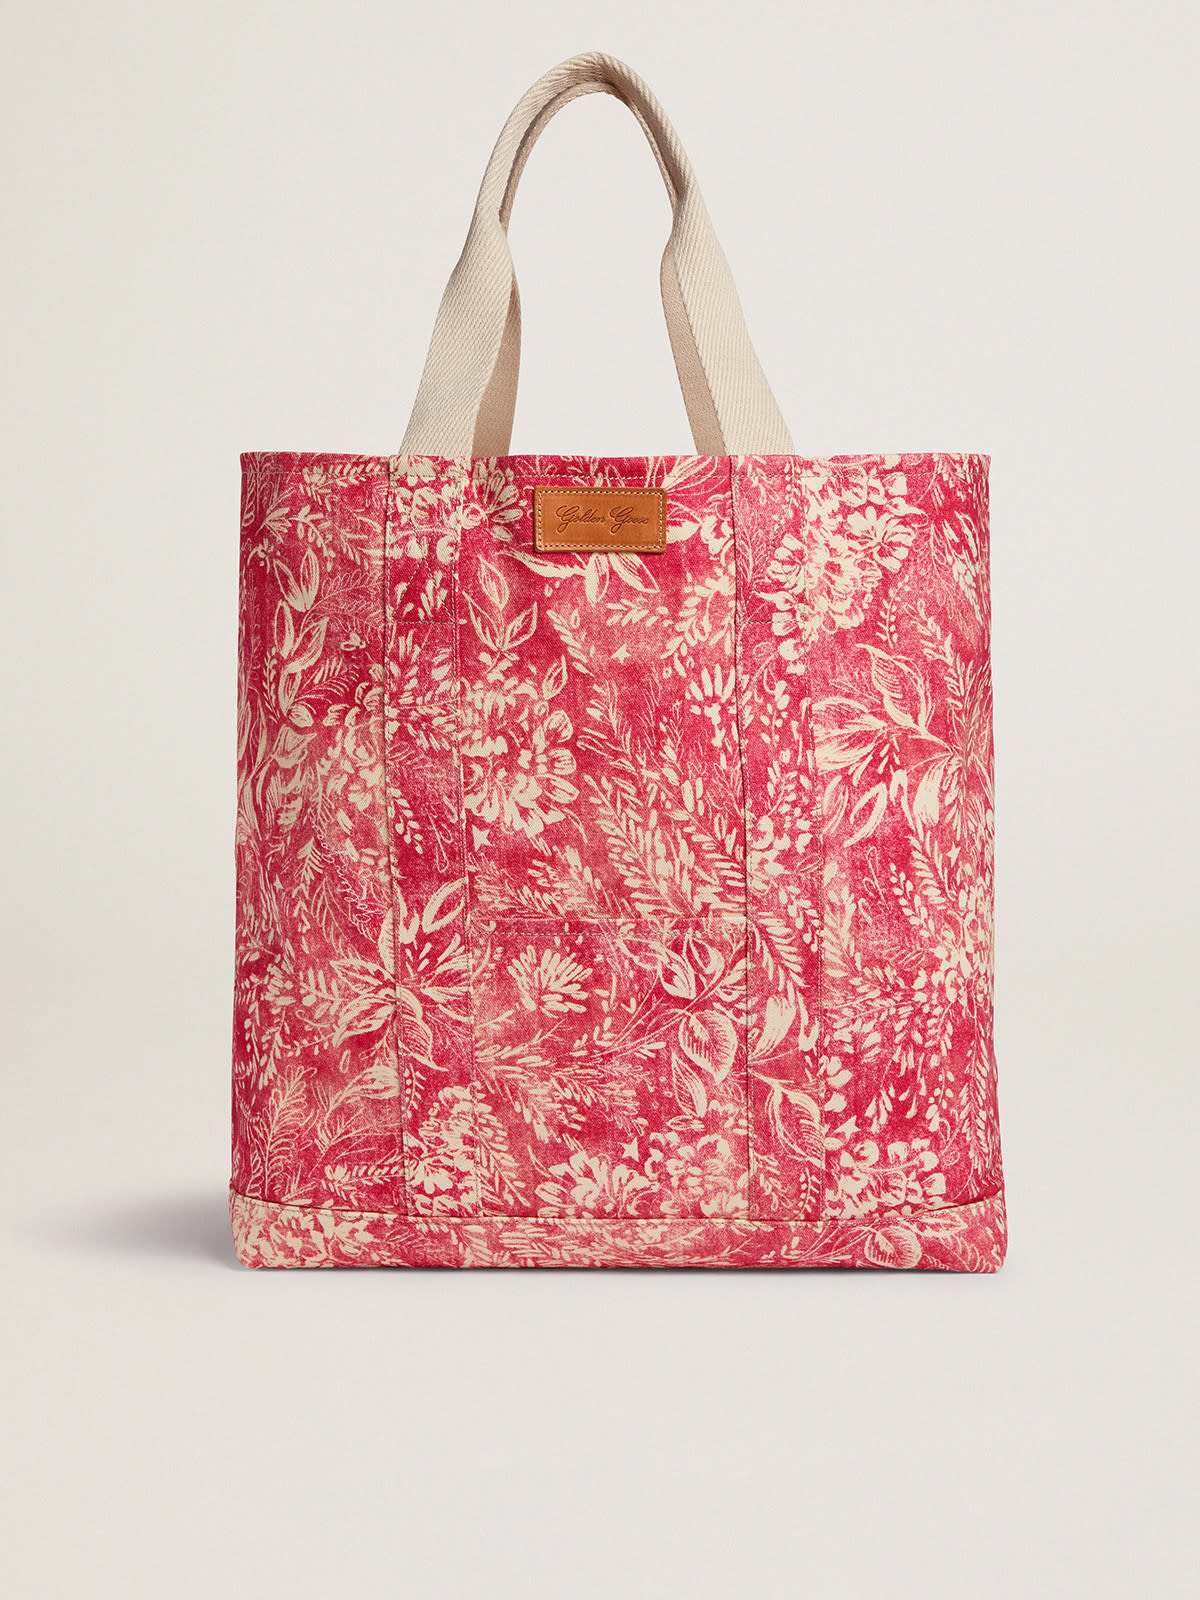 Golden Goose - Golden Resort Capsule Collection canvas Ocean bag in vintage red with contrasting white toile de jouy print in 